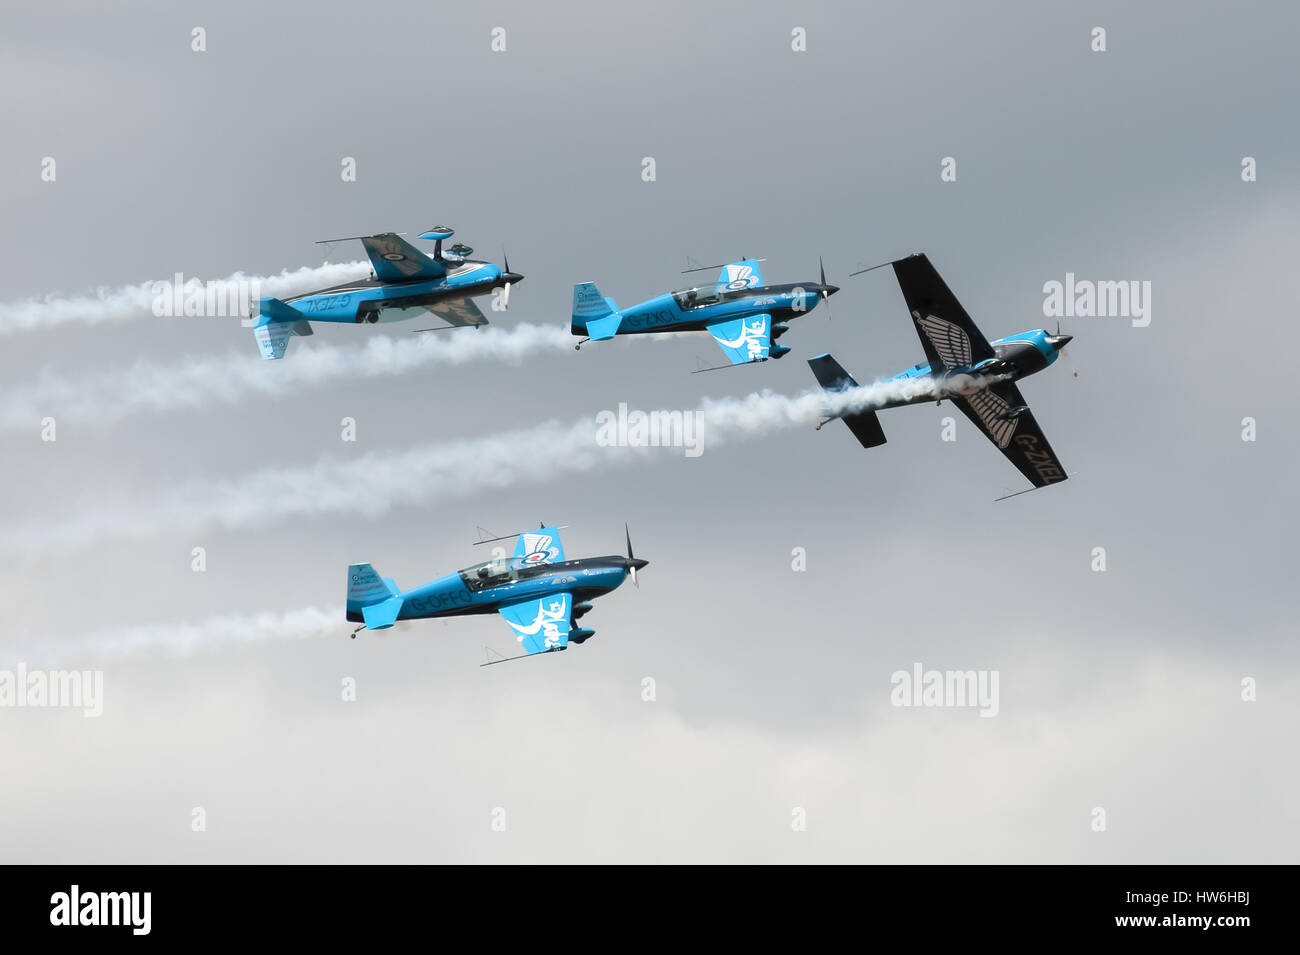 The Blades formation aerobatics team performing a maneuver known as Crazy Flying. Stock Photo